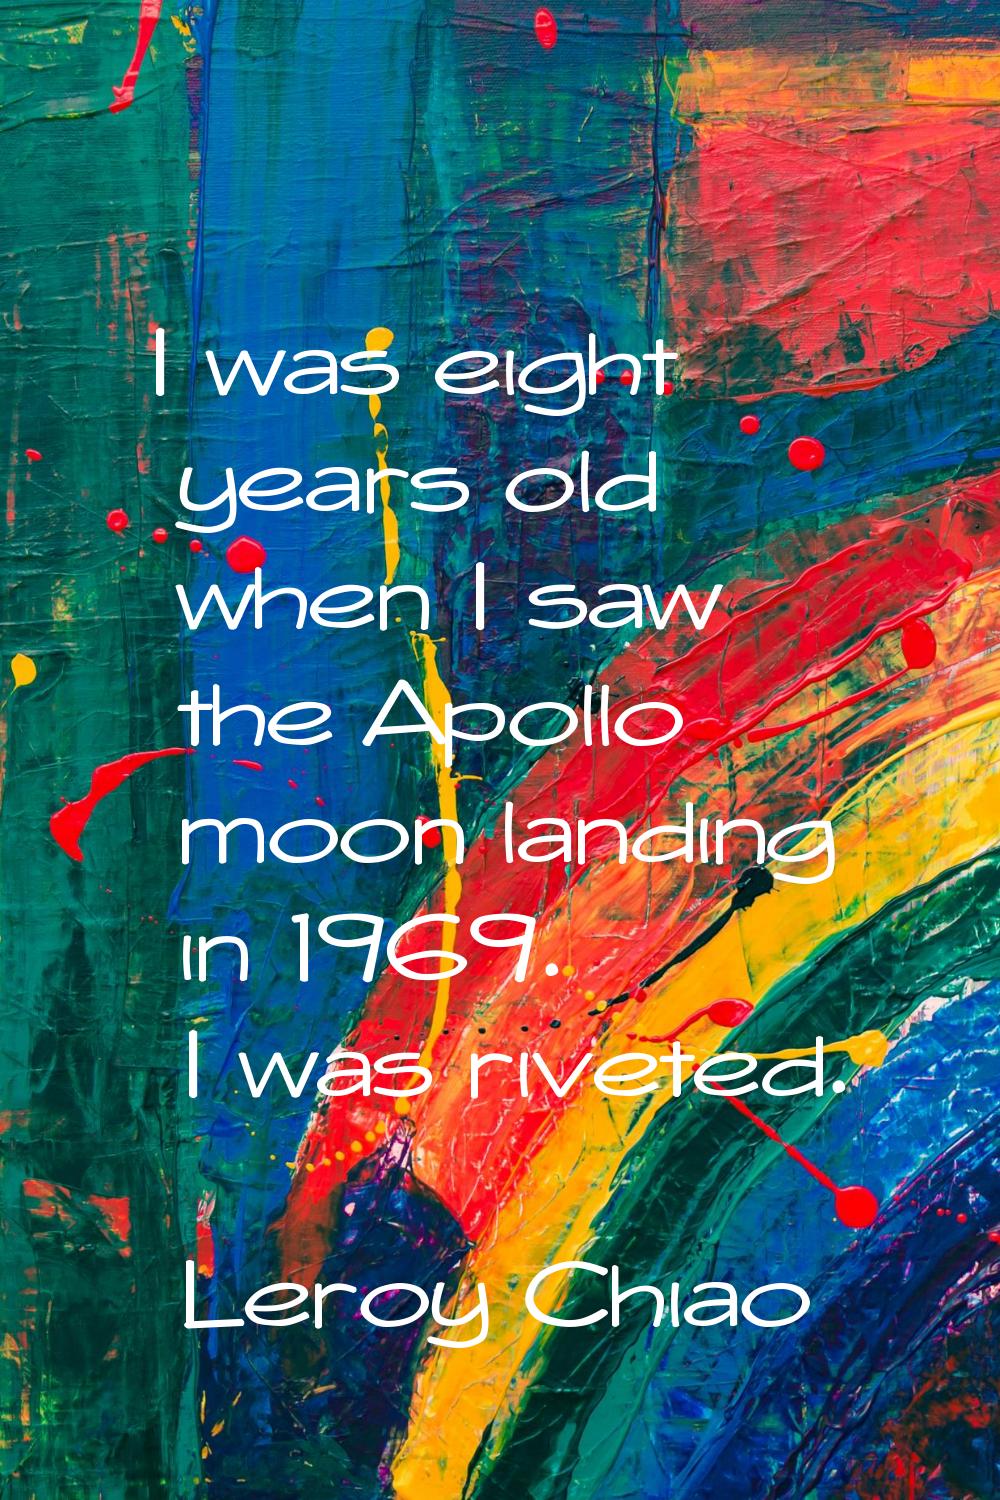 I was eight years old when I saw the Apollo moon landing in 1969. I was riveted.